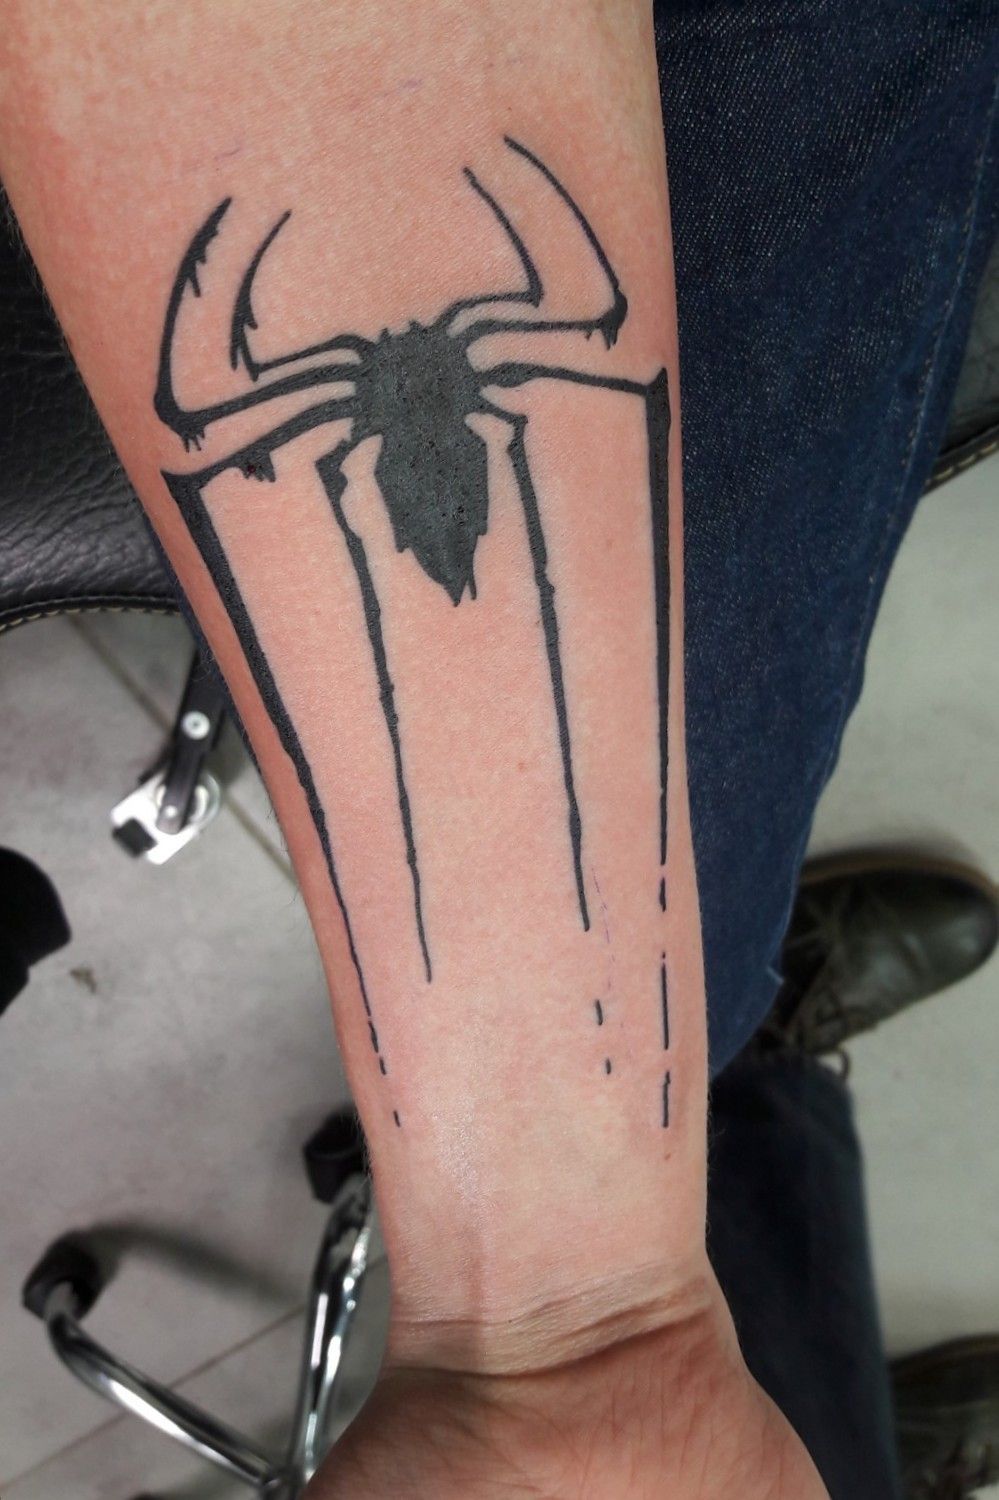 Tattoo uploaded by Benjamin Peschier  SpiderMan logo  Done by  sadkaya   Gs And Gents Tattoo Parlour The Hague  Tattoodo